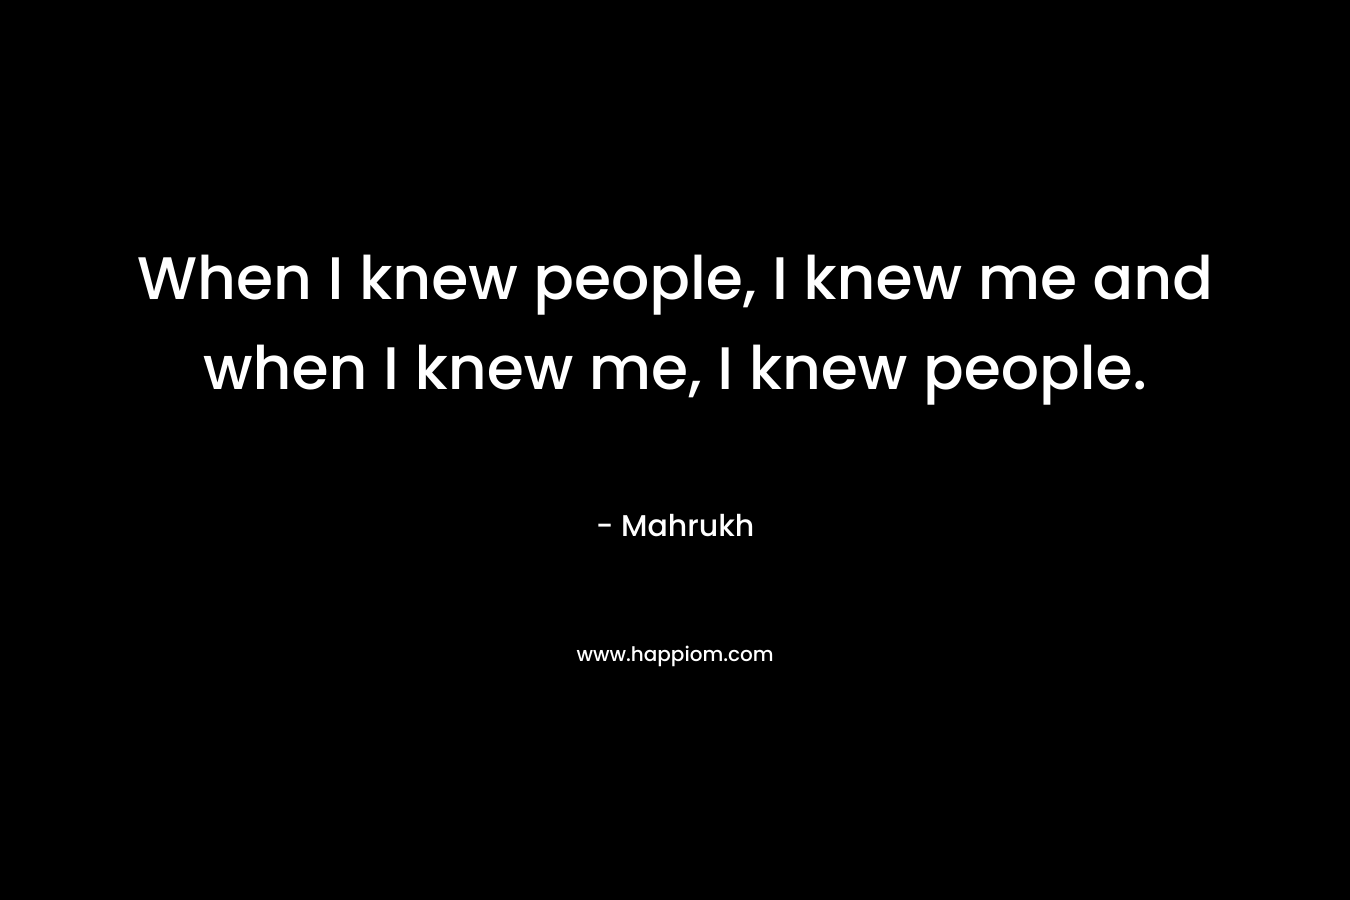 When I knew people, I knew me and when I knew me, I knew people.